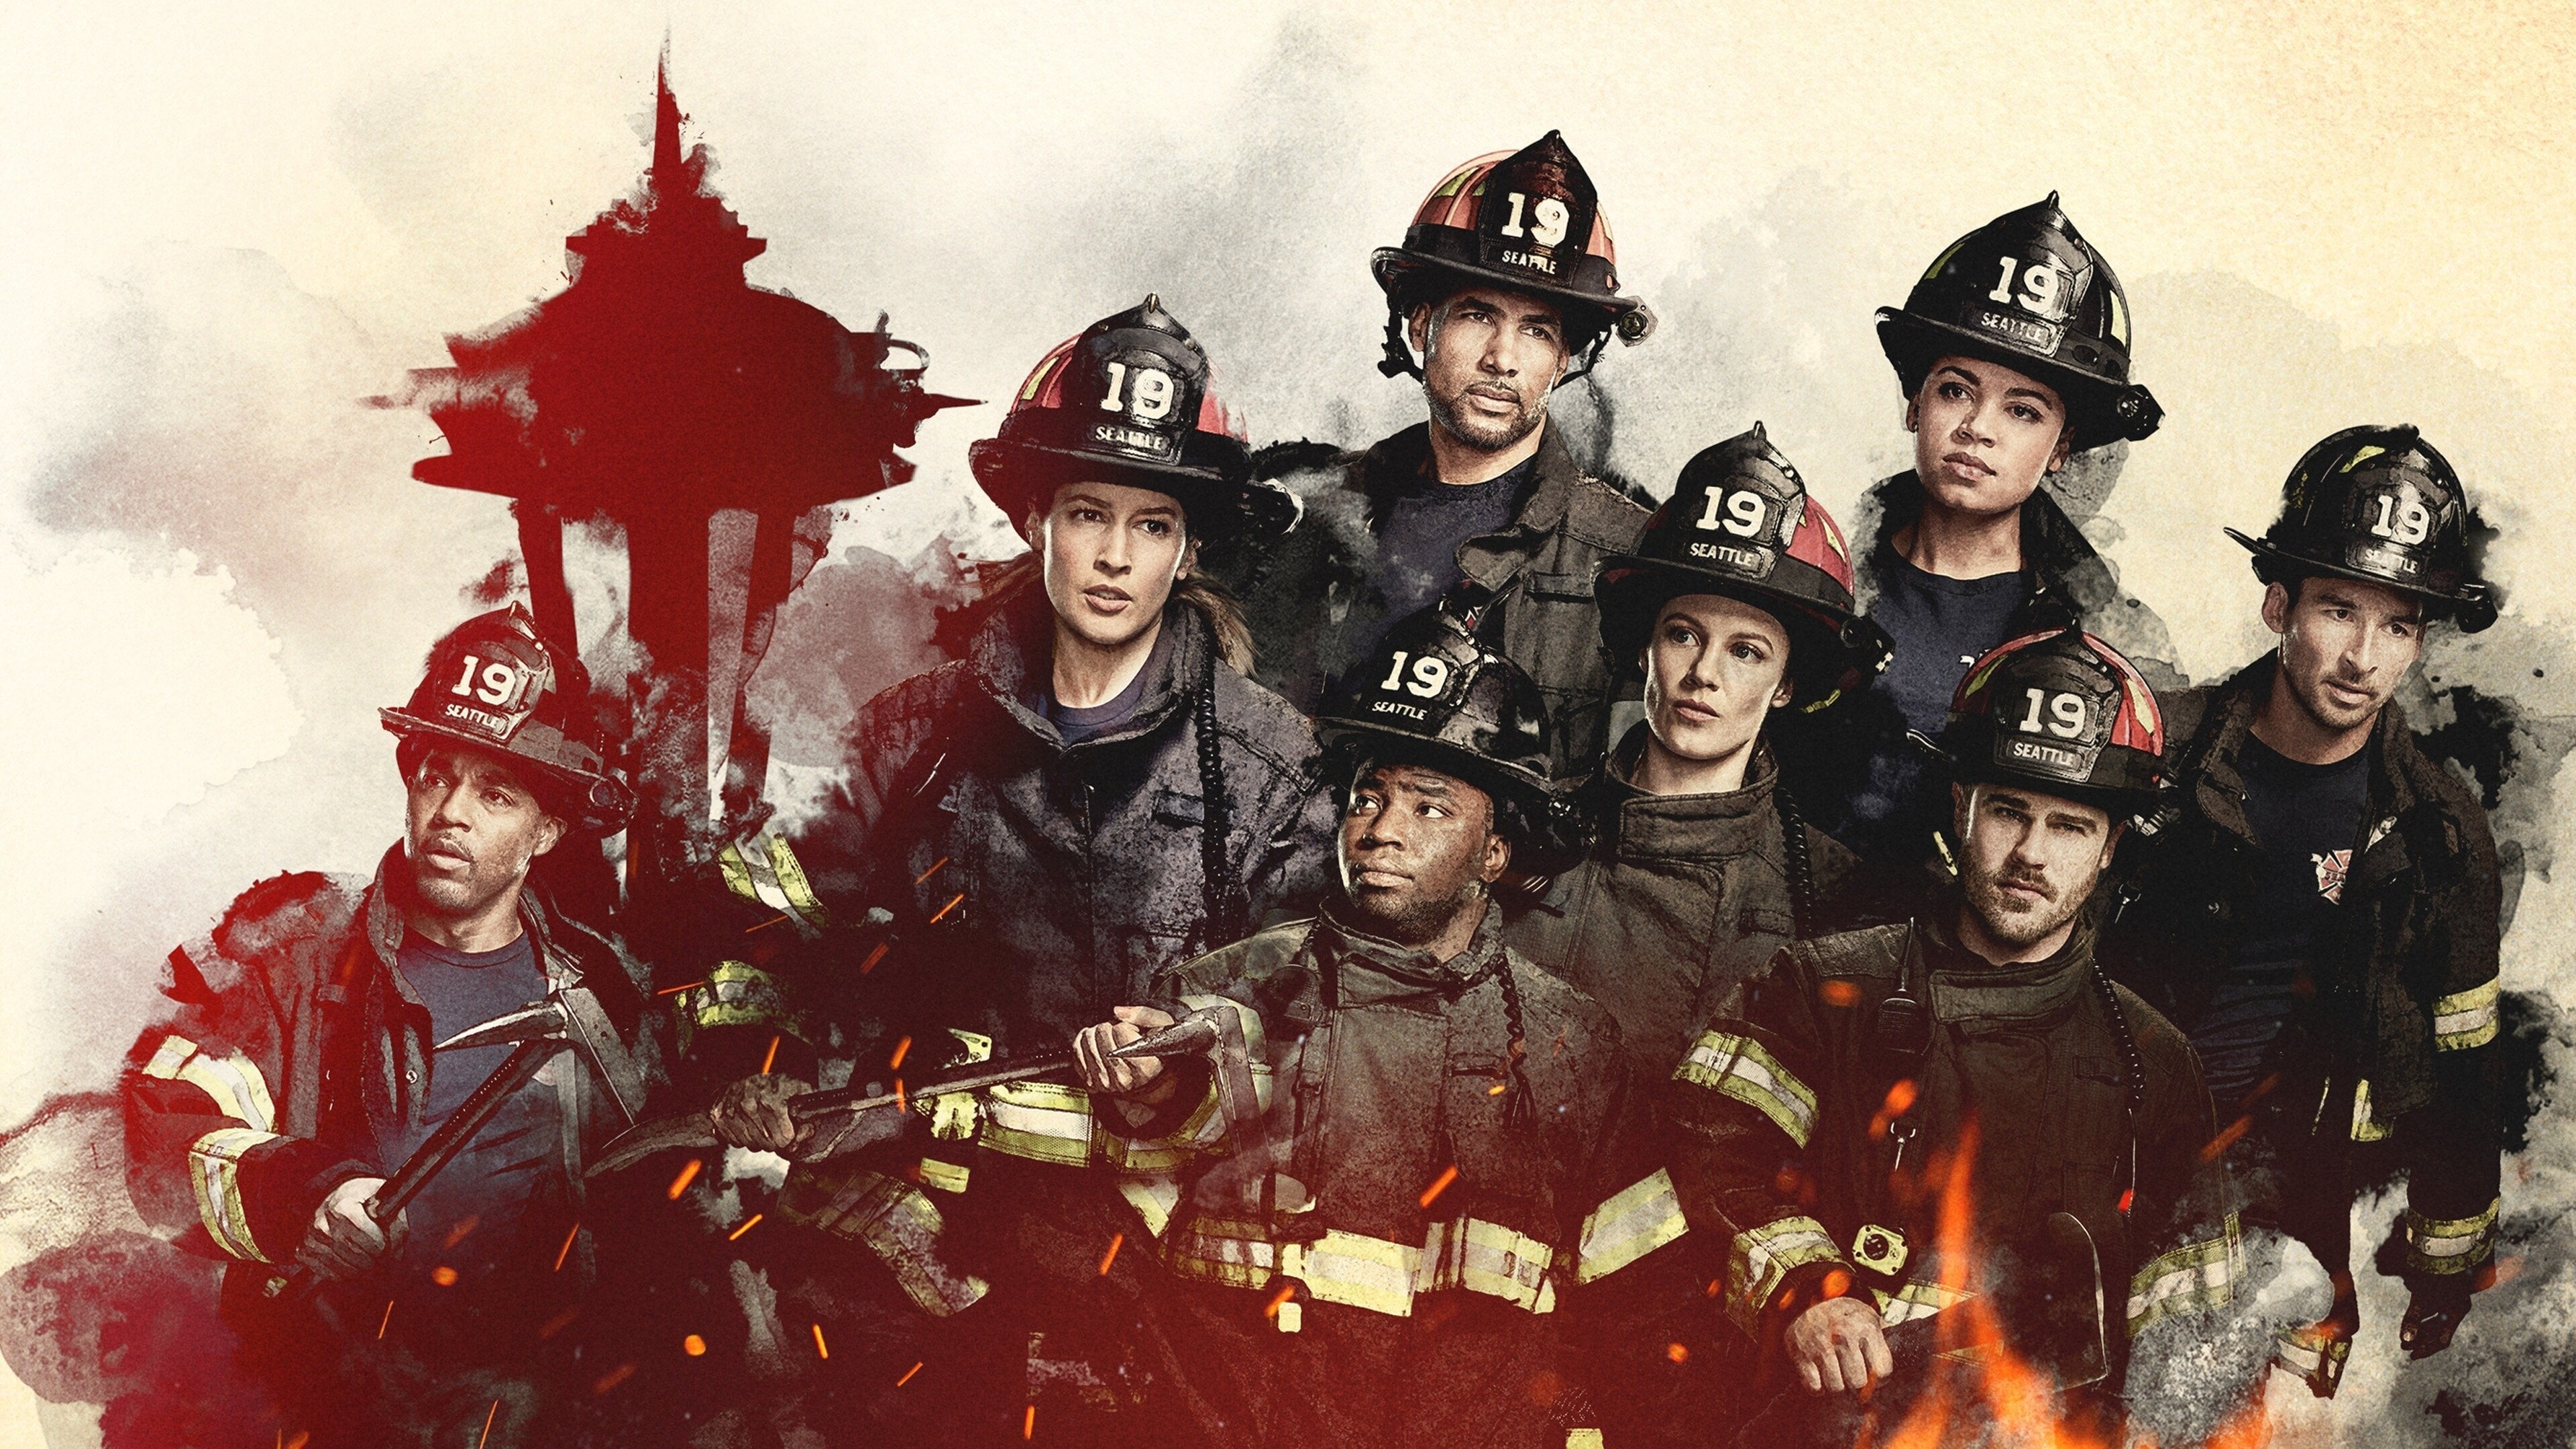 Station 19 (TV Series): An American Action Drama, Life At Firehouse Station, Created By Stacy McKee. 3840x2160 4K Background.